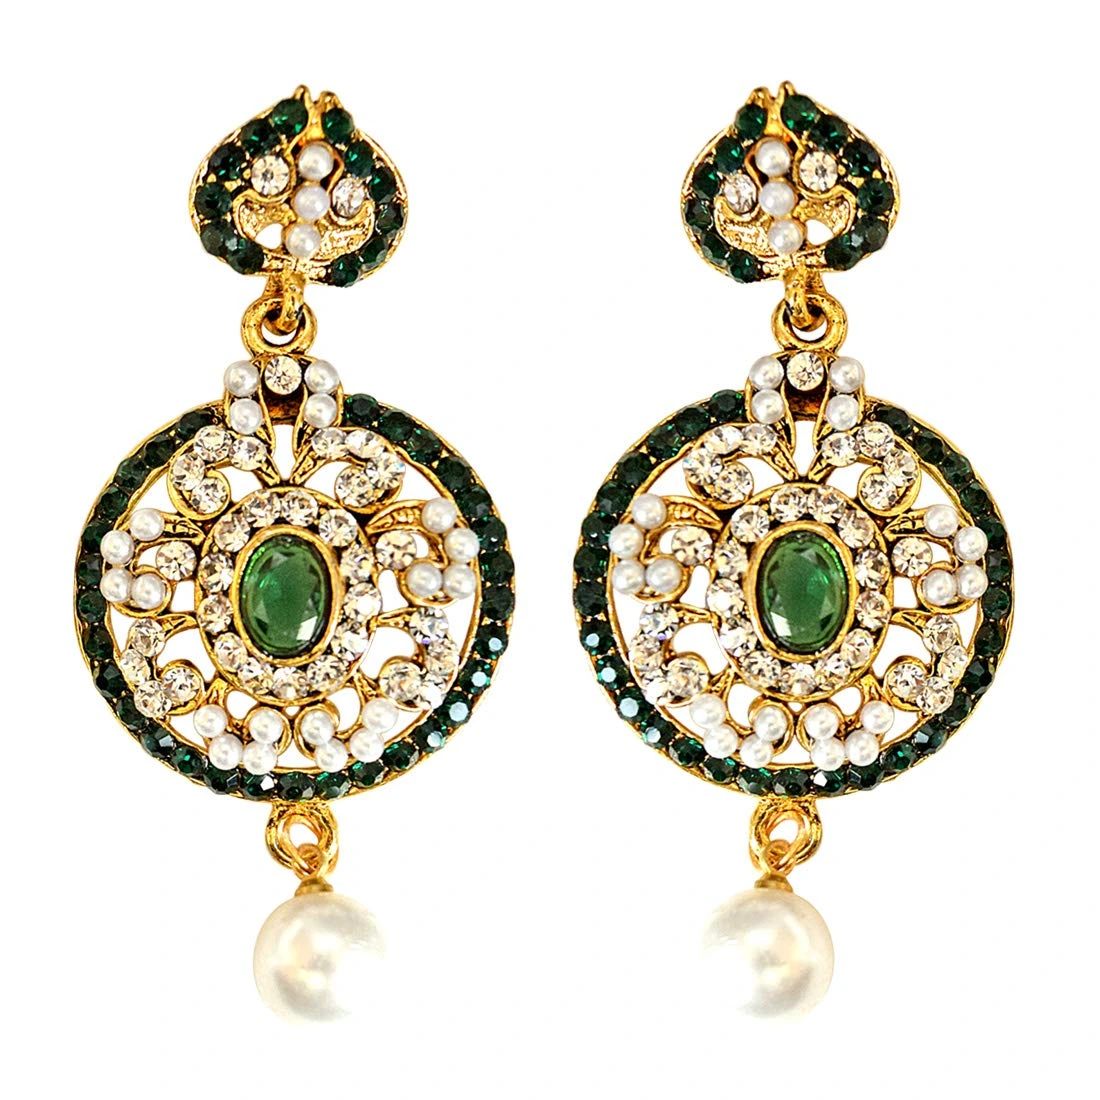 Round Shaped Green & White Coloured Stone, Shell Pearl & Gold Plated Dangling Earrings for Women